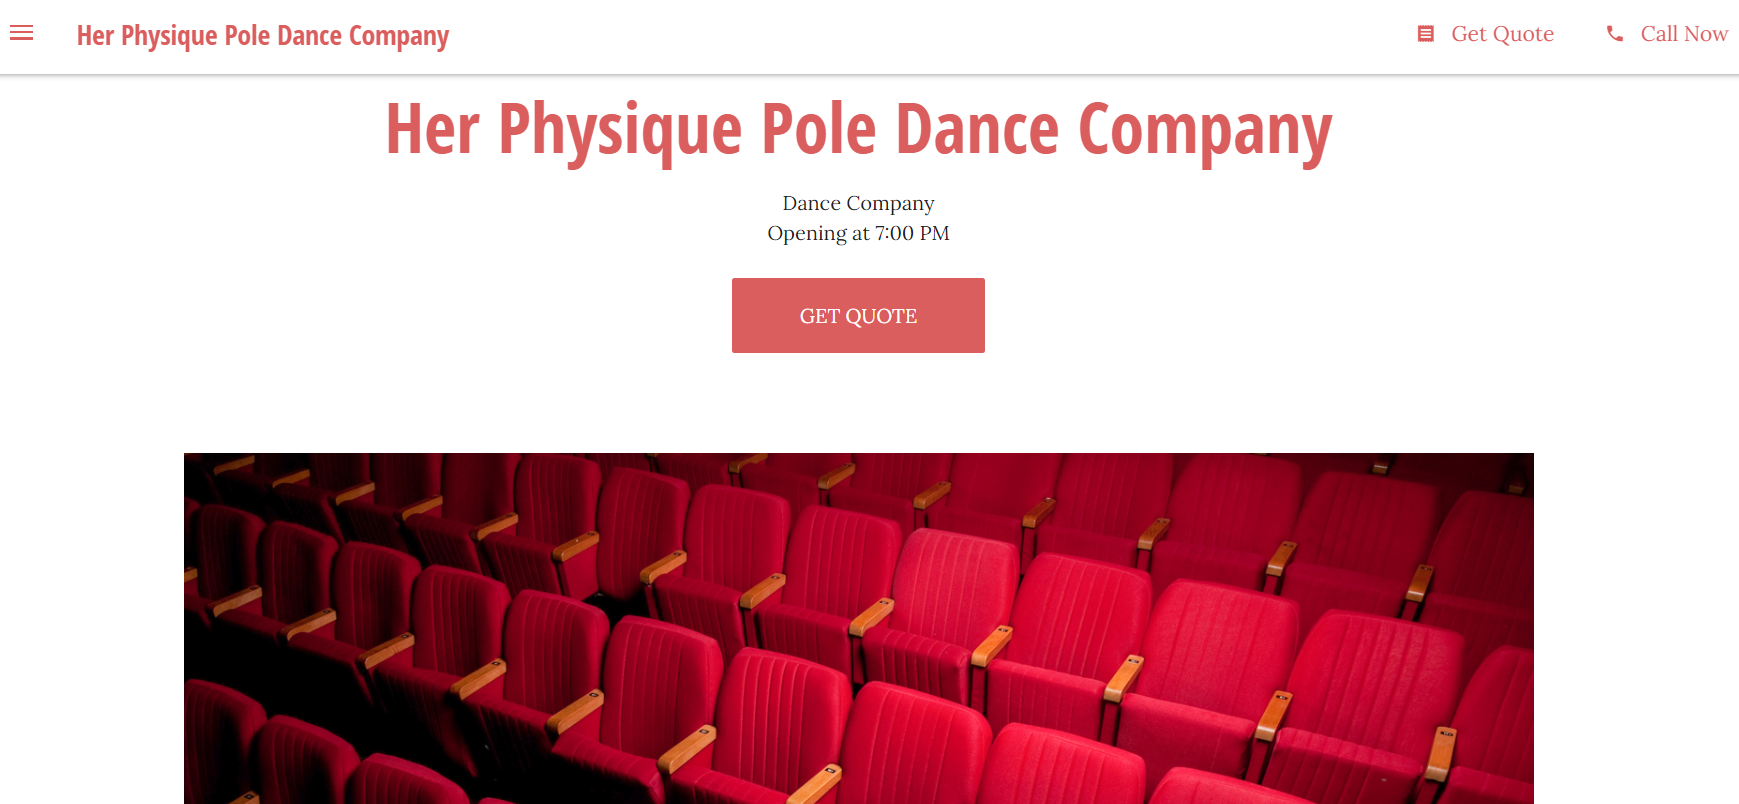 He.  Physique Pole Dance Company is one of the Best Pole Dancing Classes In Tallahassee